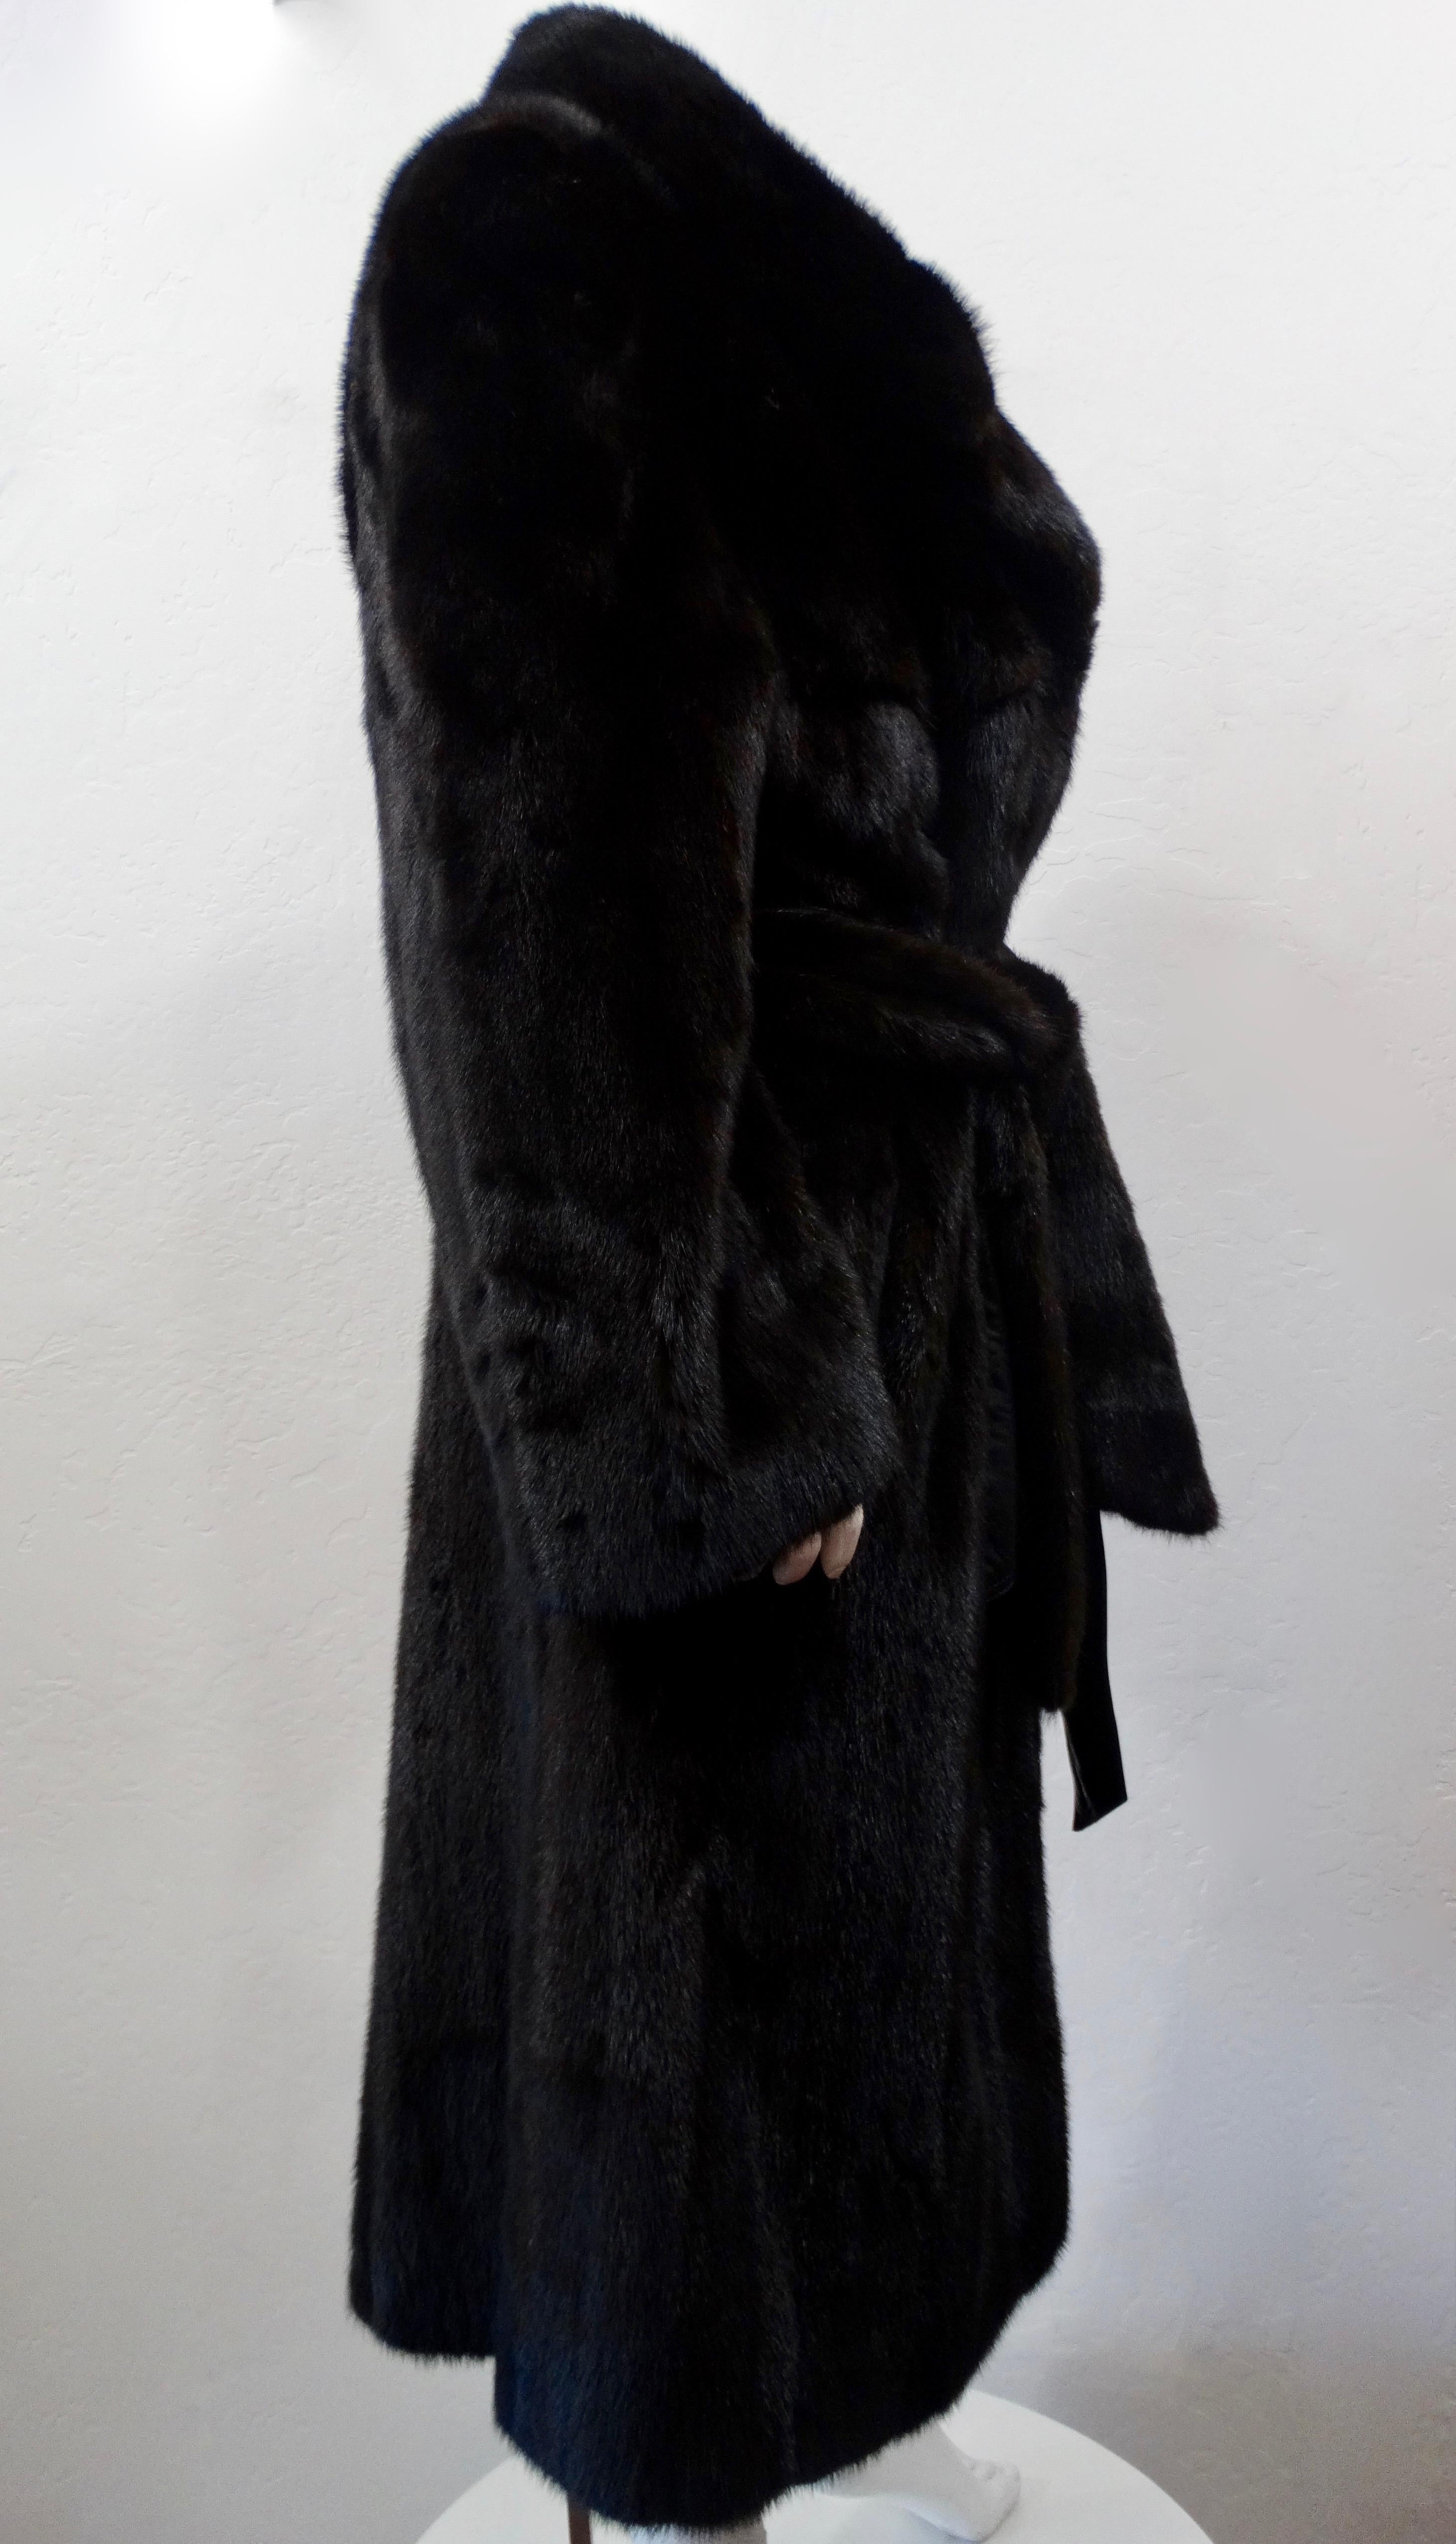 Stay cozy and stylish all winter long with this amazing Christian Dior coat!Custom made in 1978 this long fur coat is made of soft dark brown mink fur and features a shawl collar and dual front buttons. Includes a tie leather belt and a tonal mink